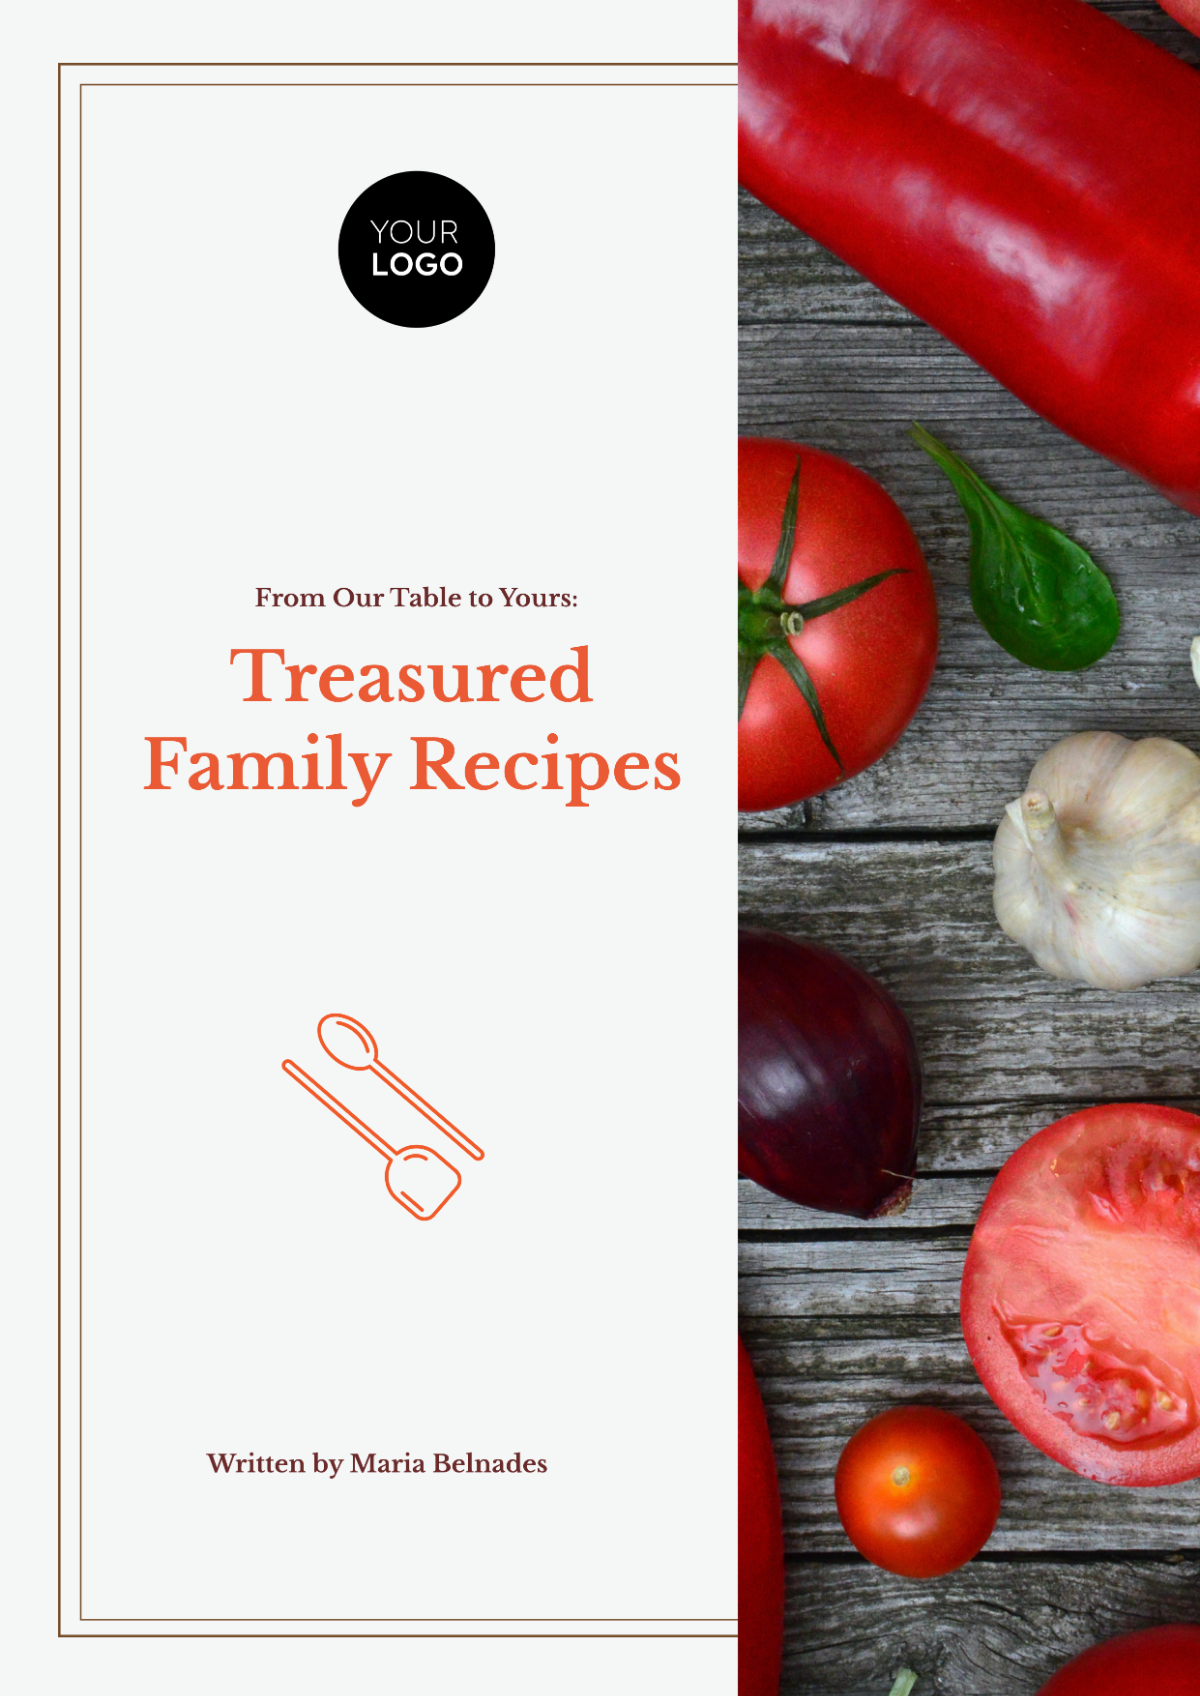 My Family Cookbook - Blank Cookbook for Family Recipes – Terma Goods